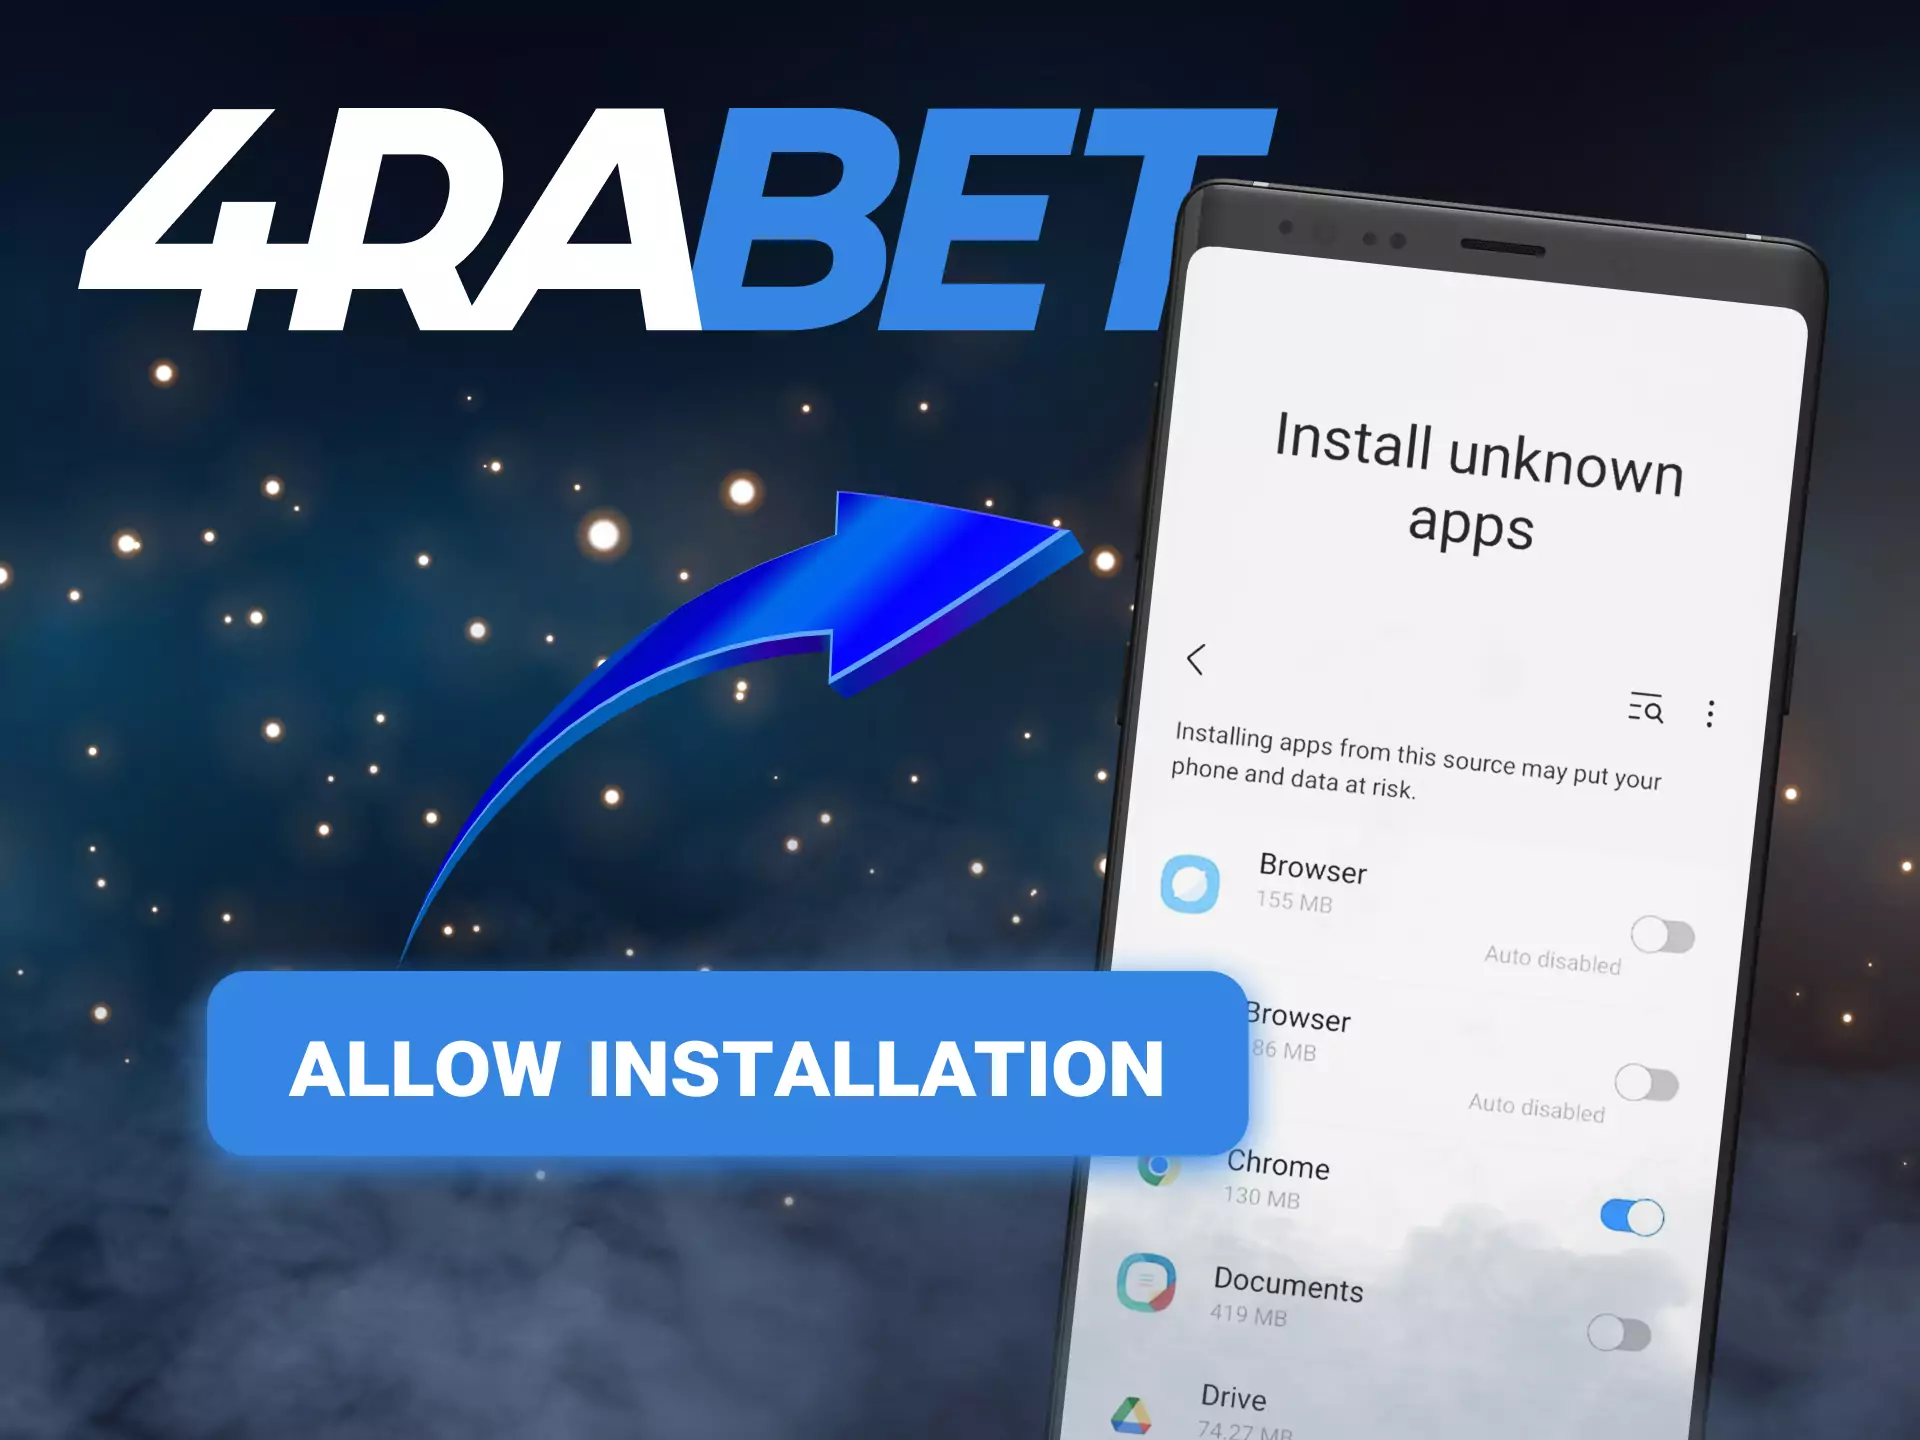 Get 4rabet on your mobile device, give permission to install.